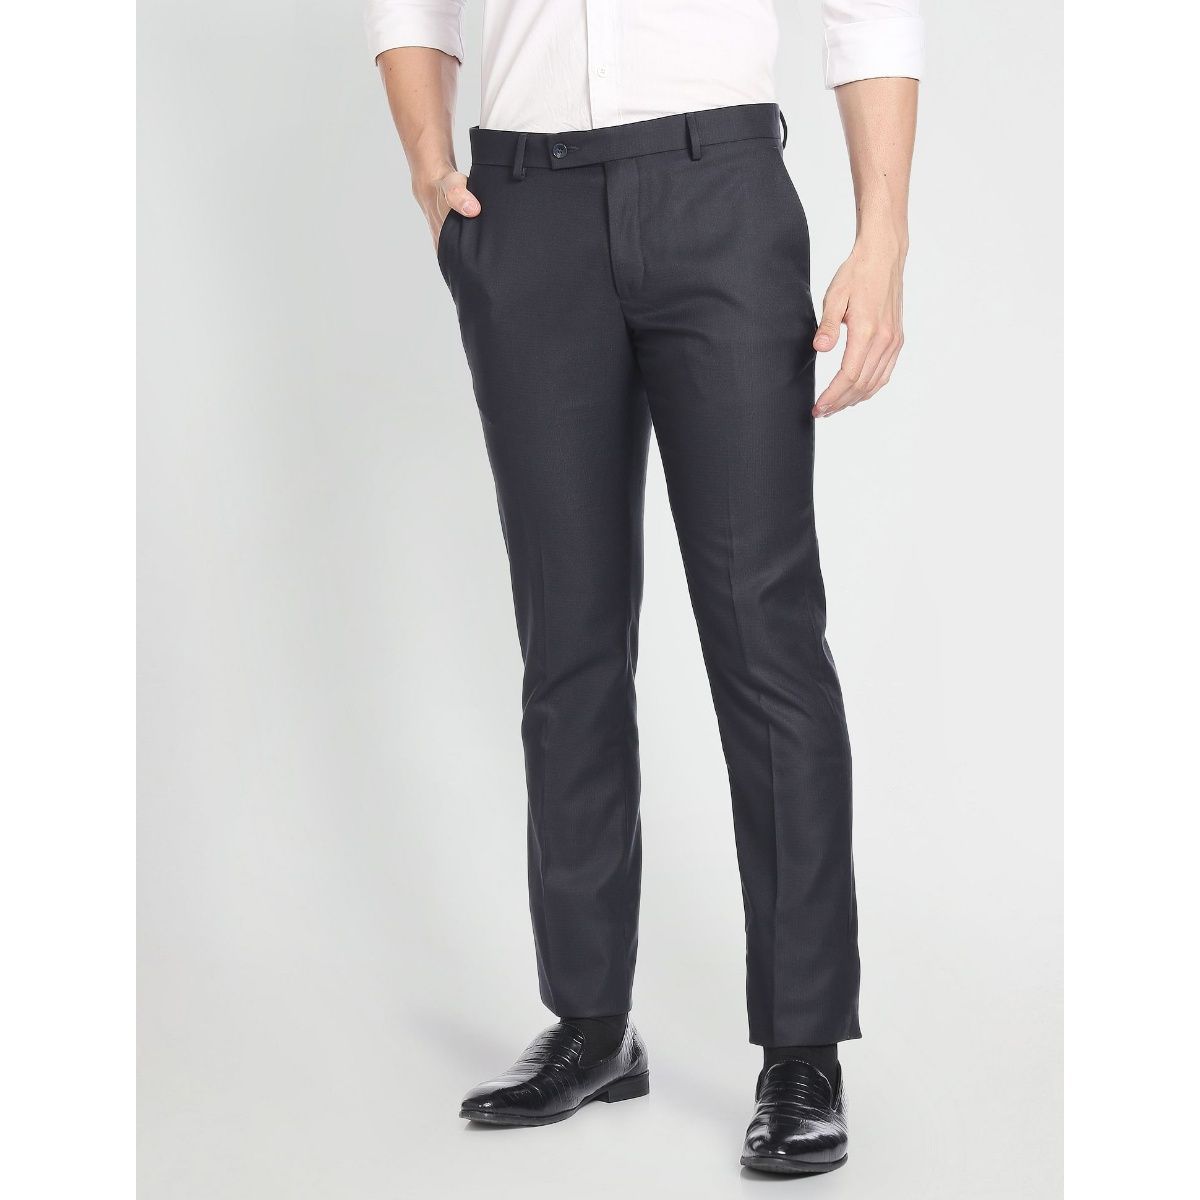 Shop Frenzy Regular Fit Women Grey Trousers - Buy Shop Frenzy Regular Fit  Women Grey Trousers Online at Best Prices in India | Flipkart.com